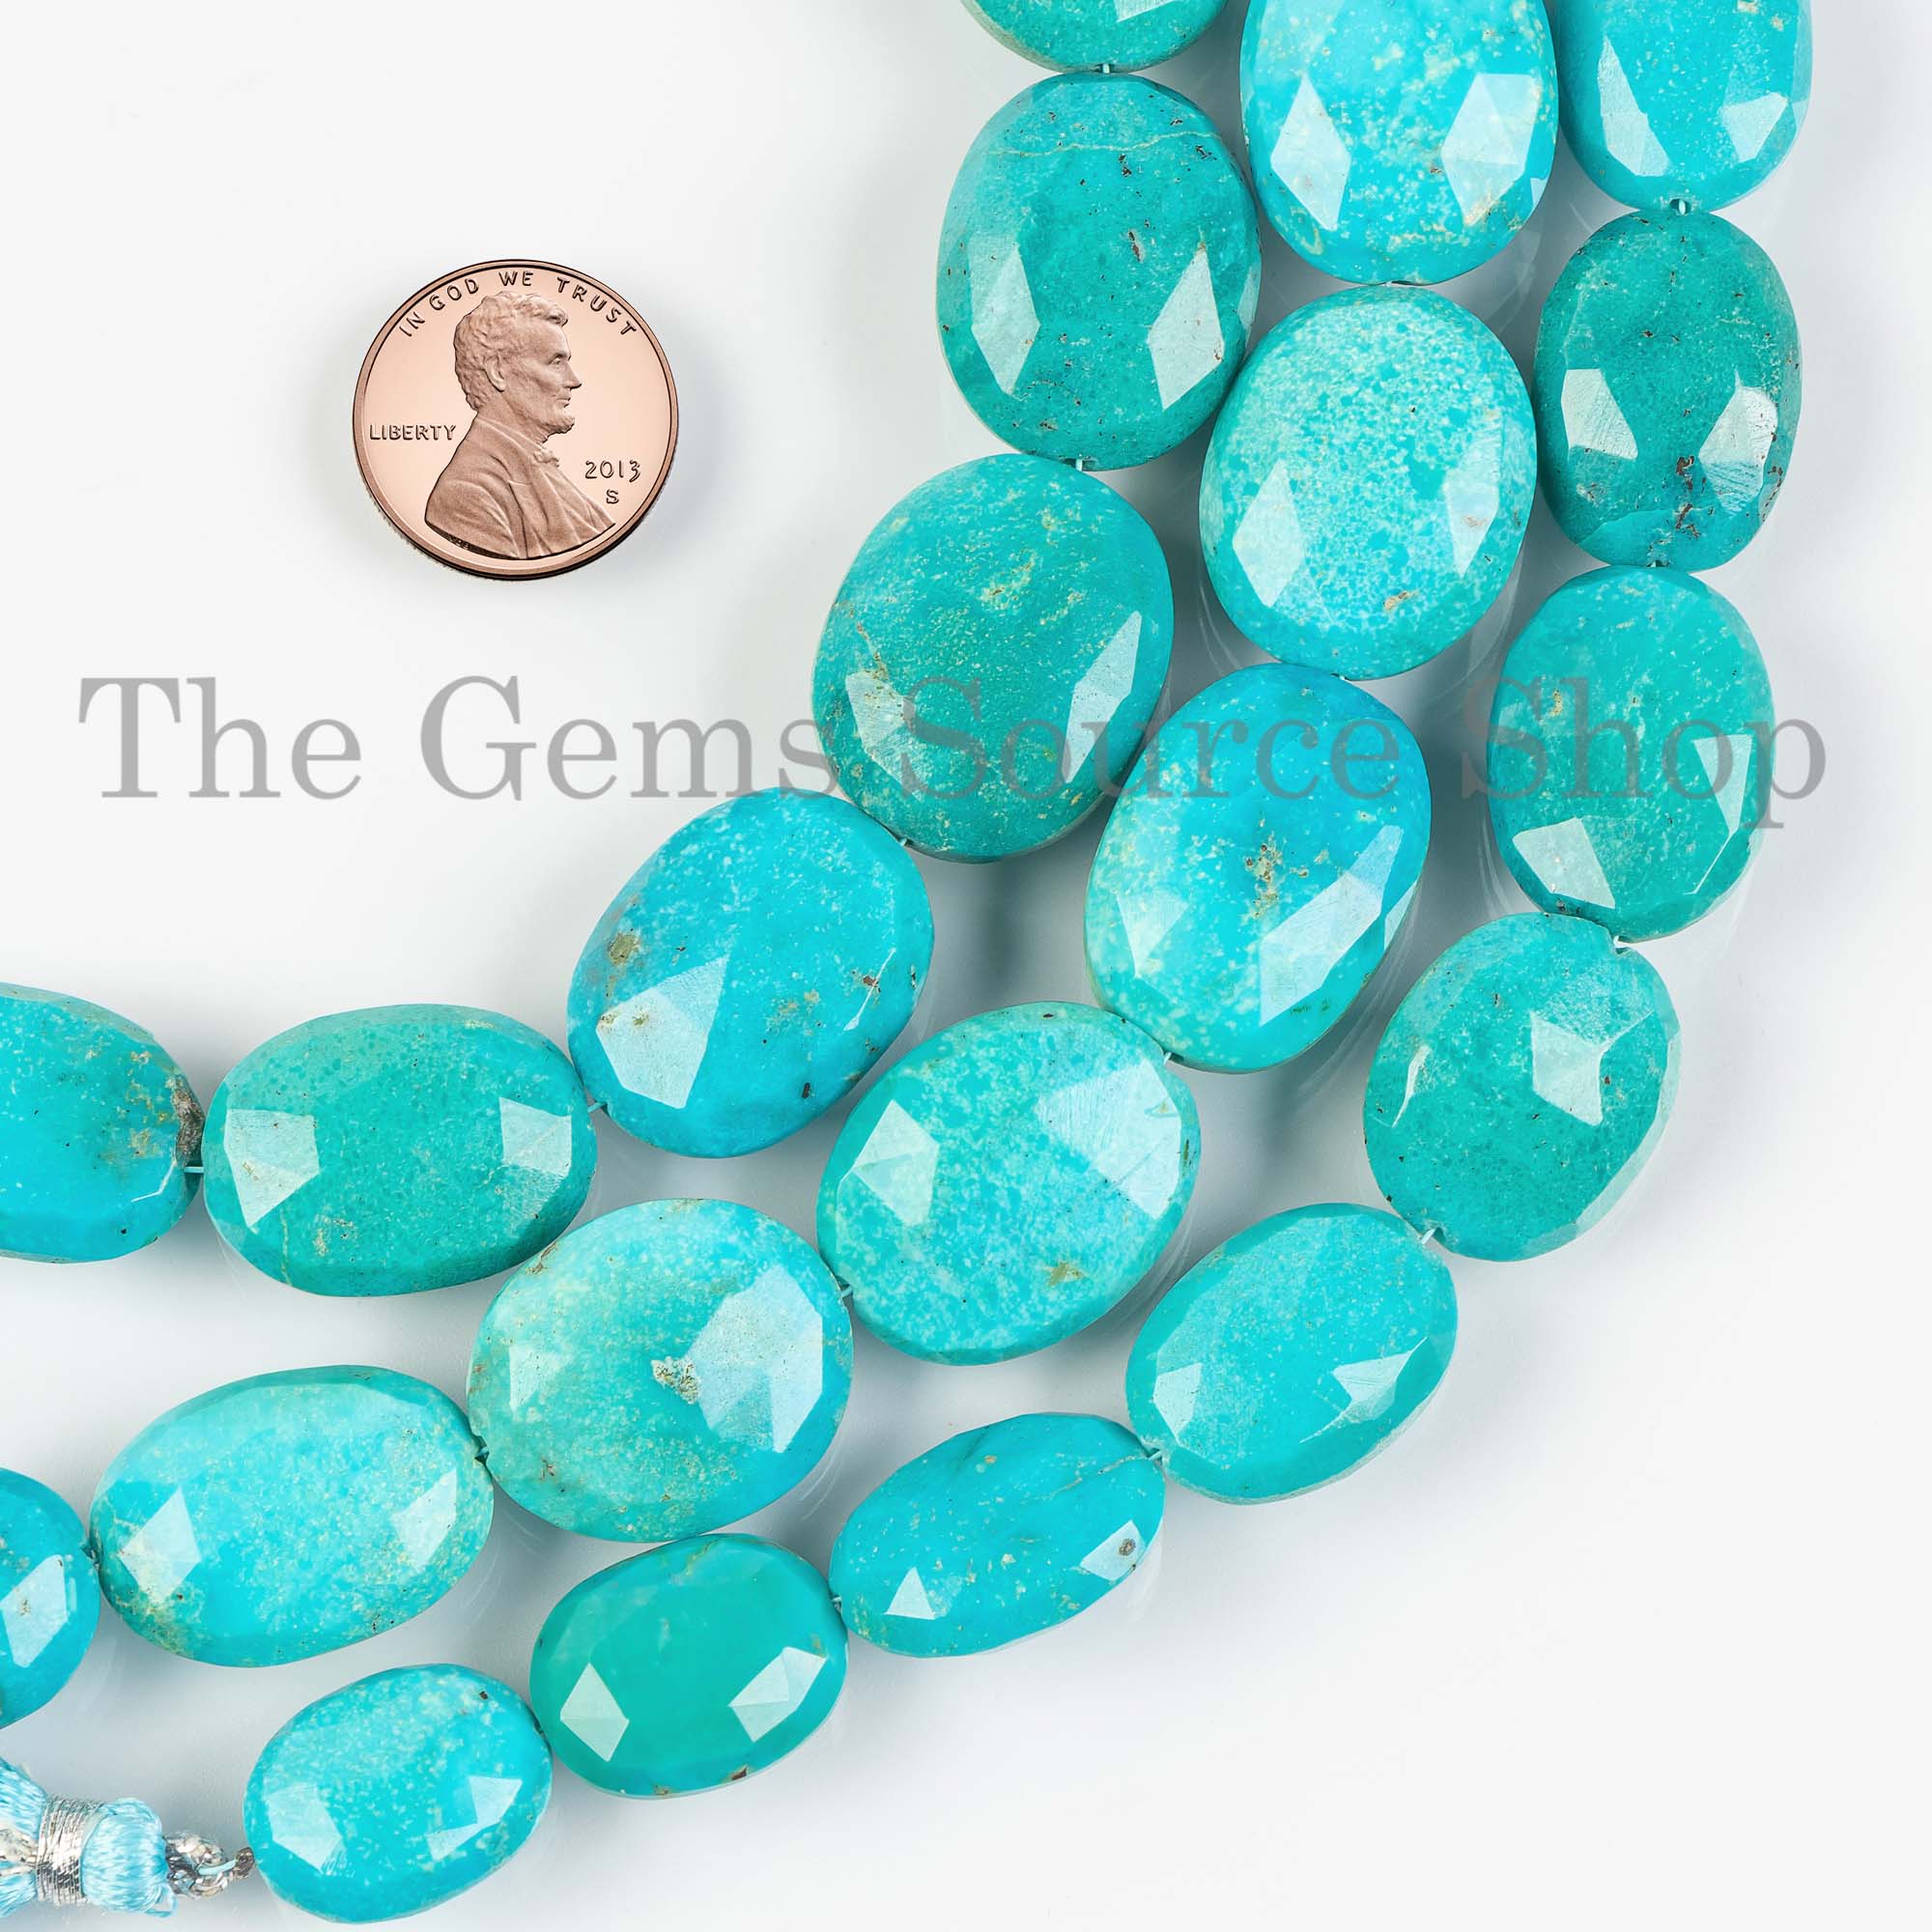 Turquoise Faceted Oval Beads, Turquoise Beads, 13x16-17x22mm Turquoise Gemstone, Turquoise Oval Briolette, Turquoise Wholesale